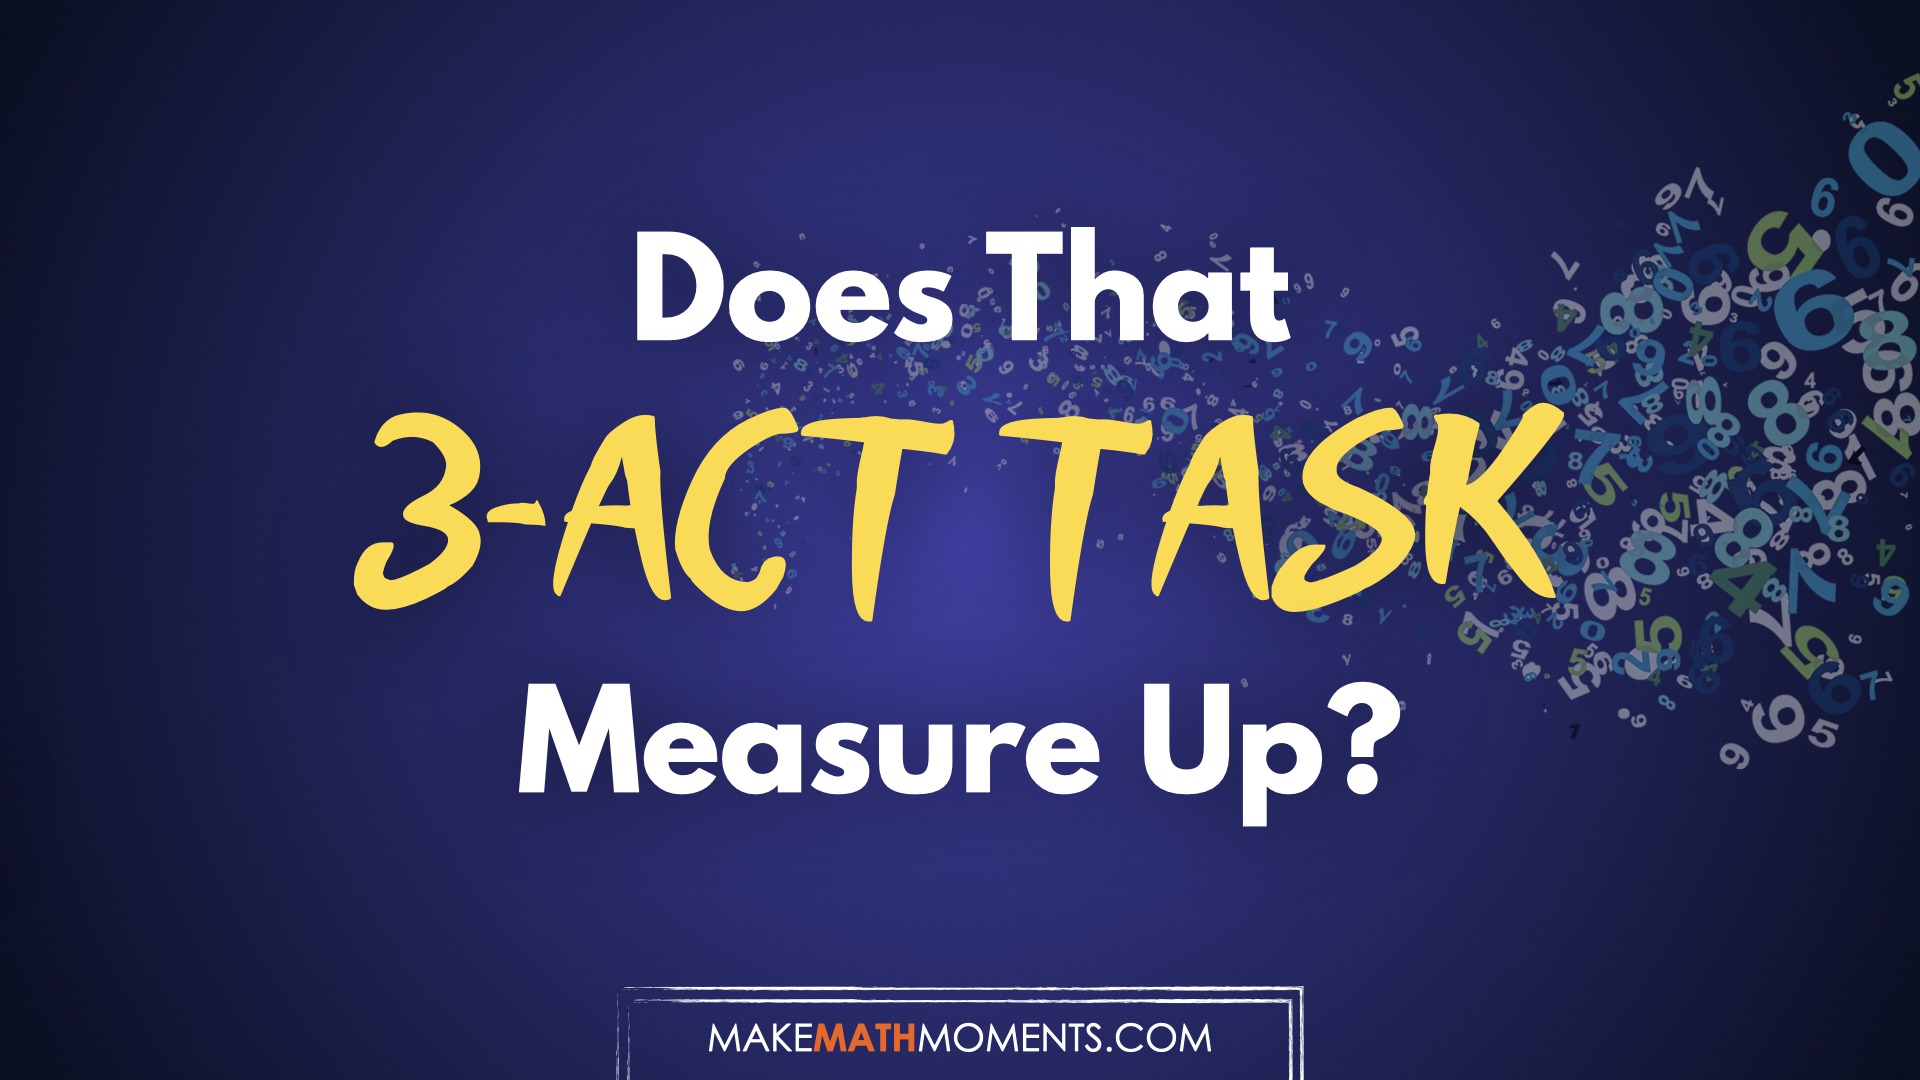 Does That 3-Act Task Measure Up?